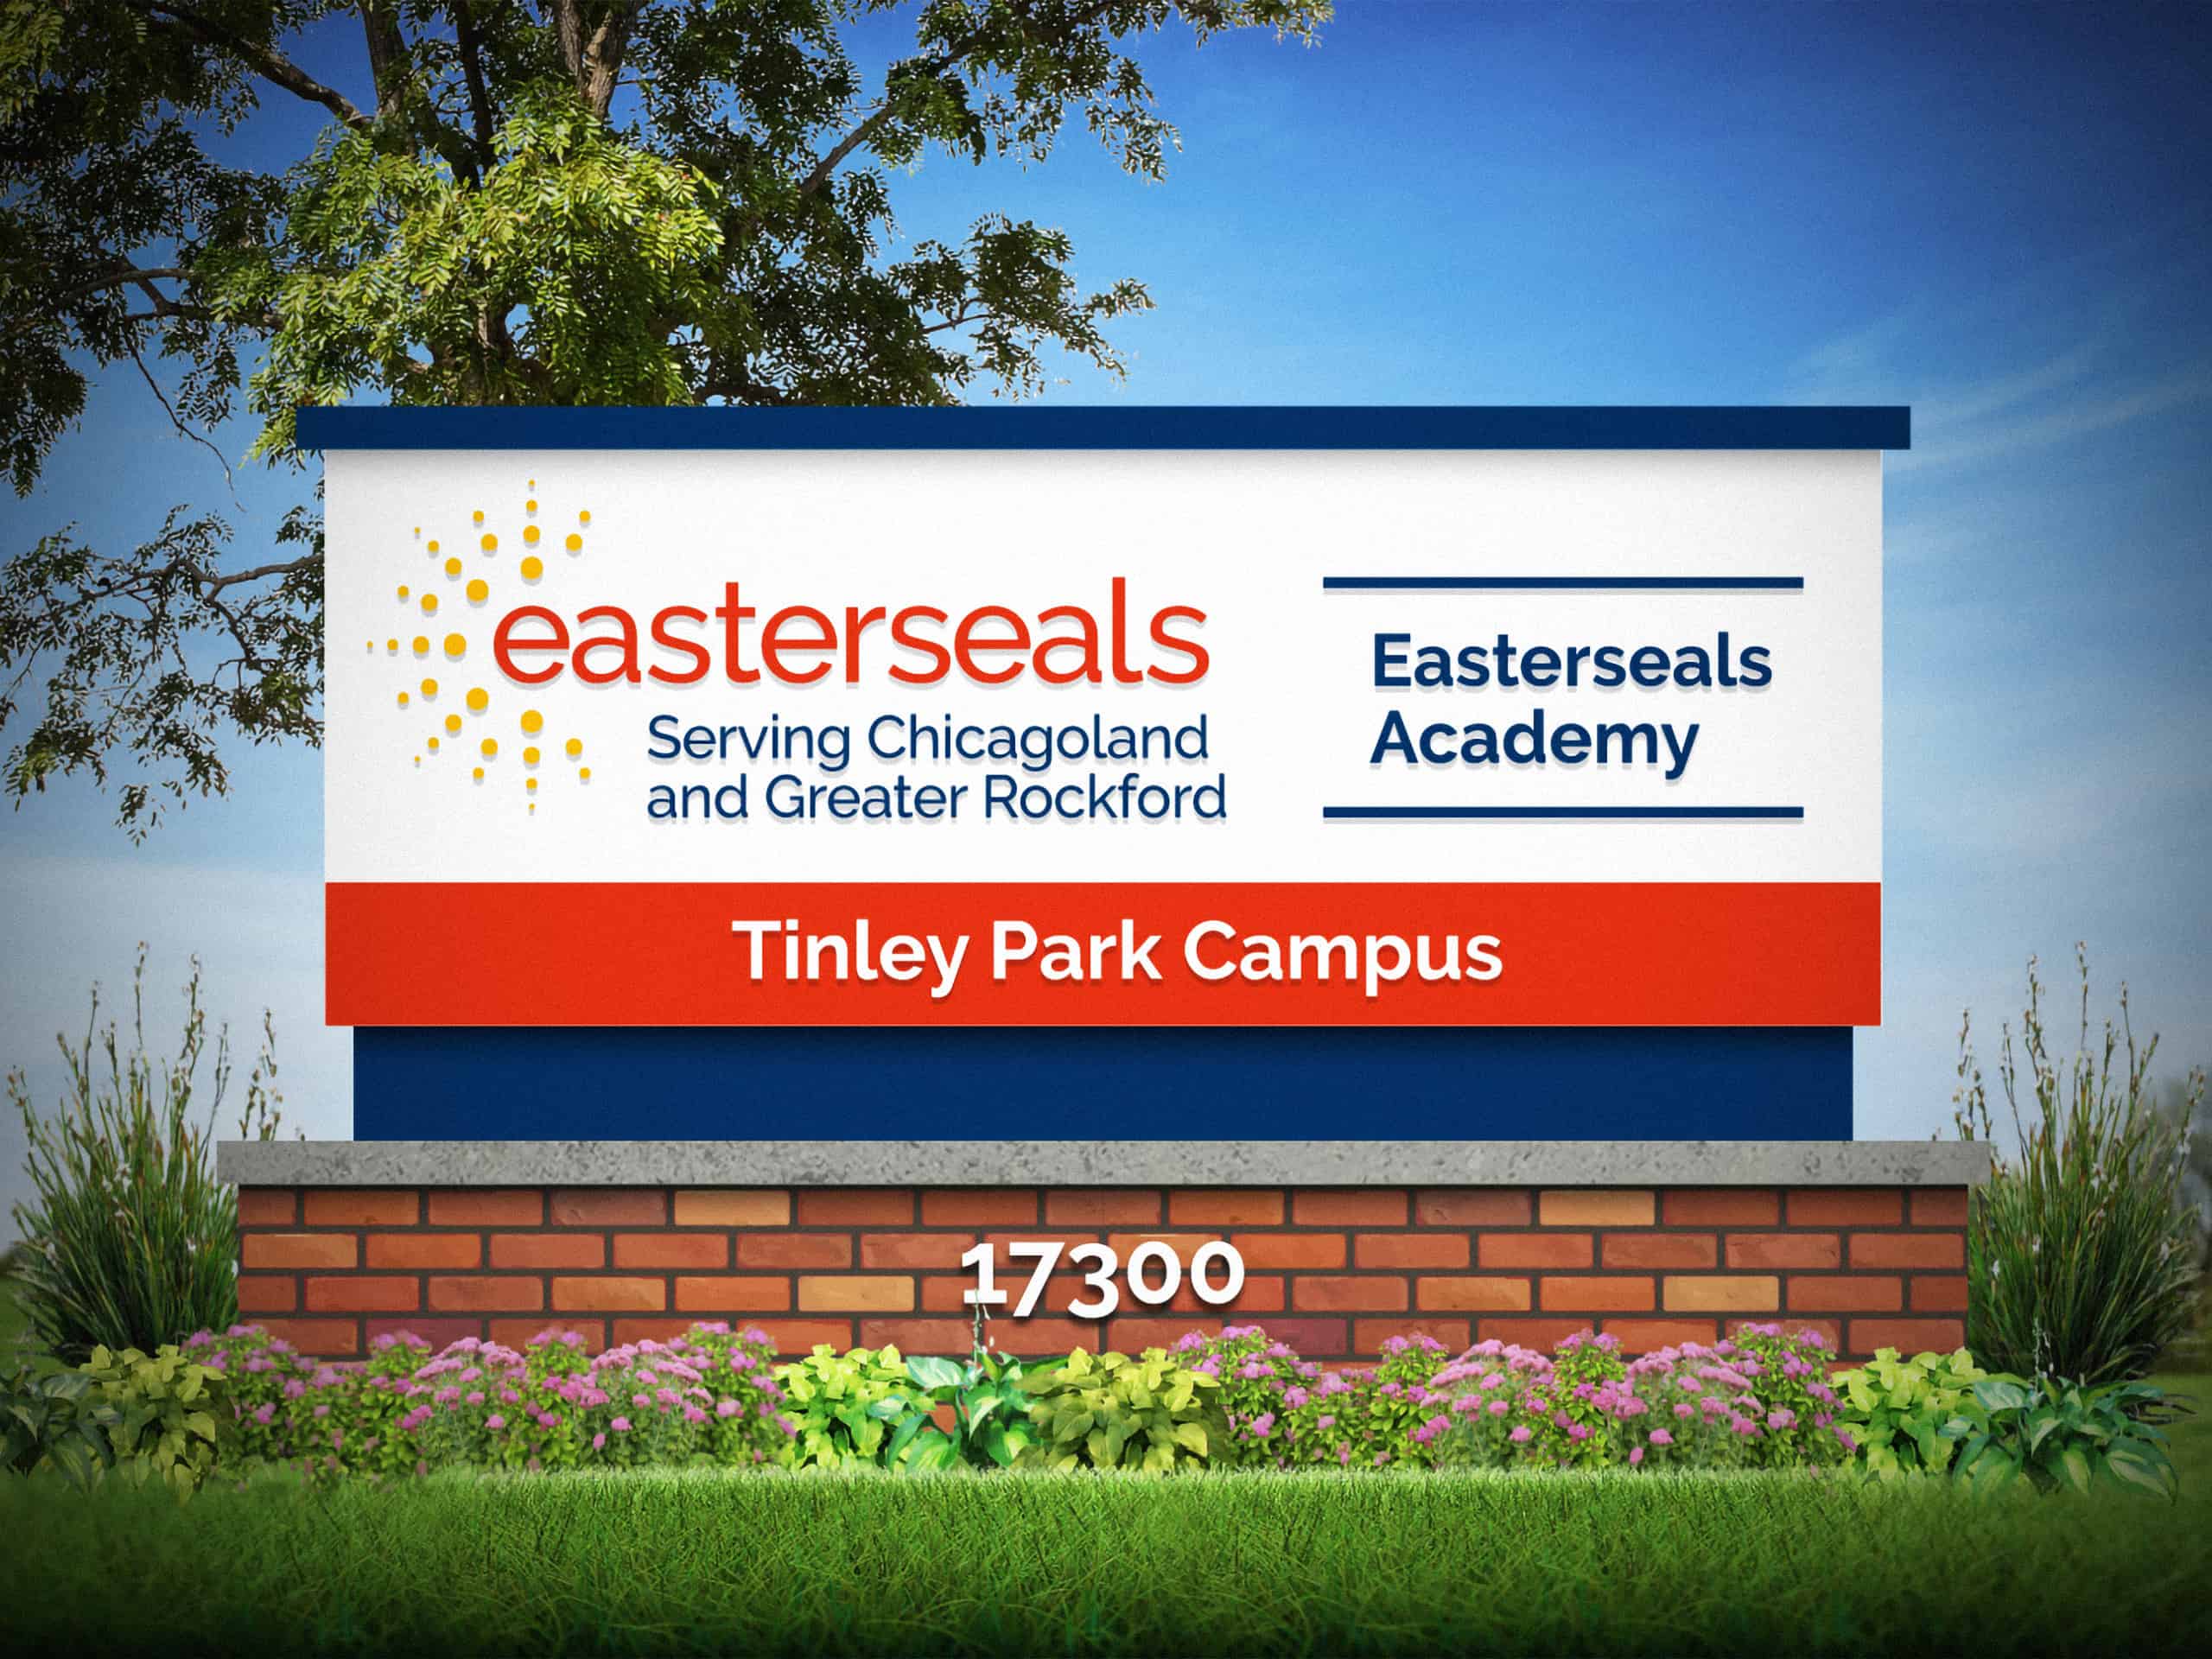 A sign for easter seals academy in tiley park campus.